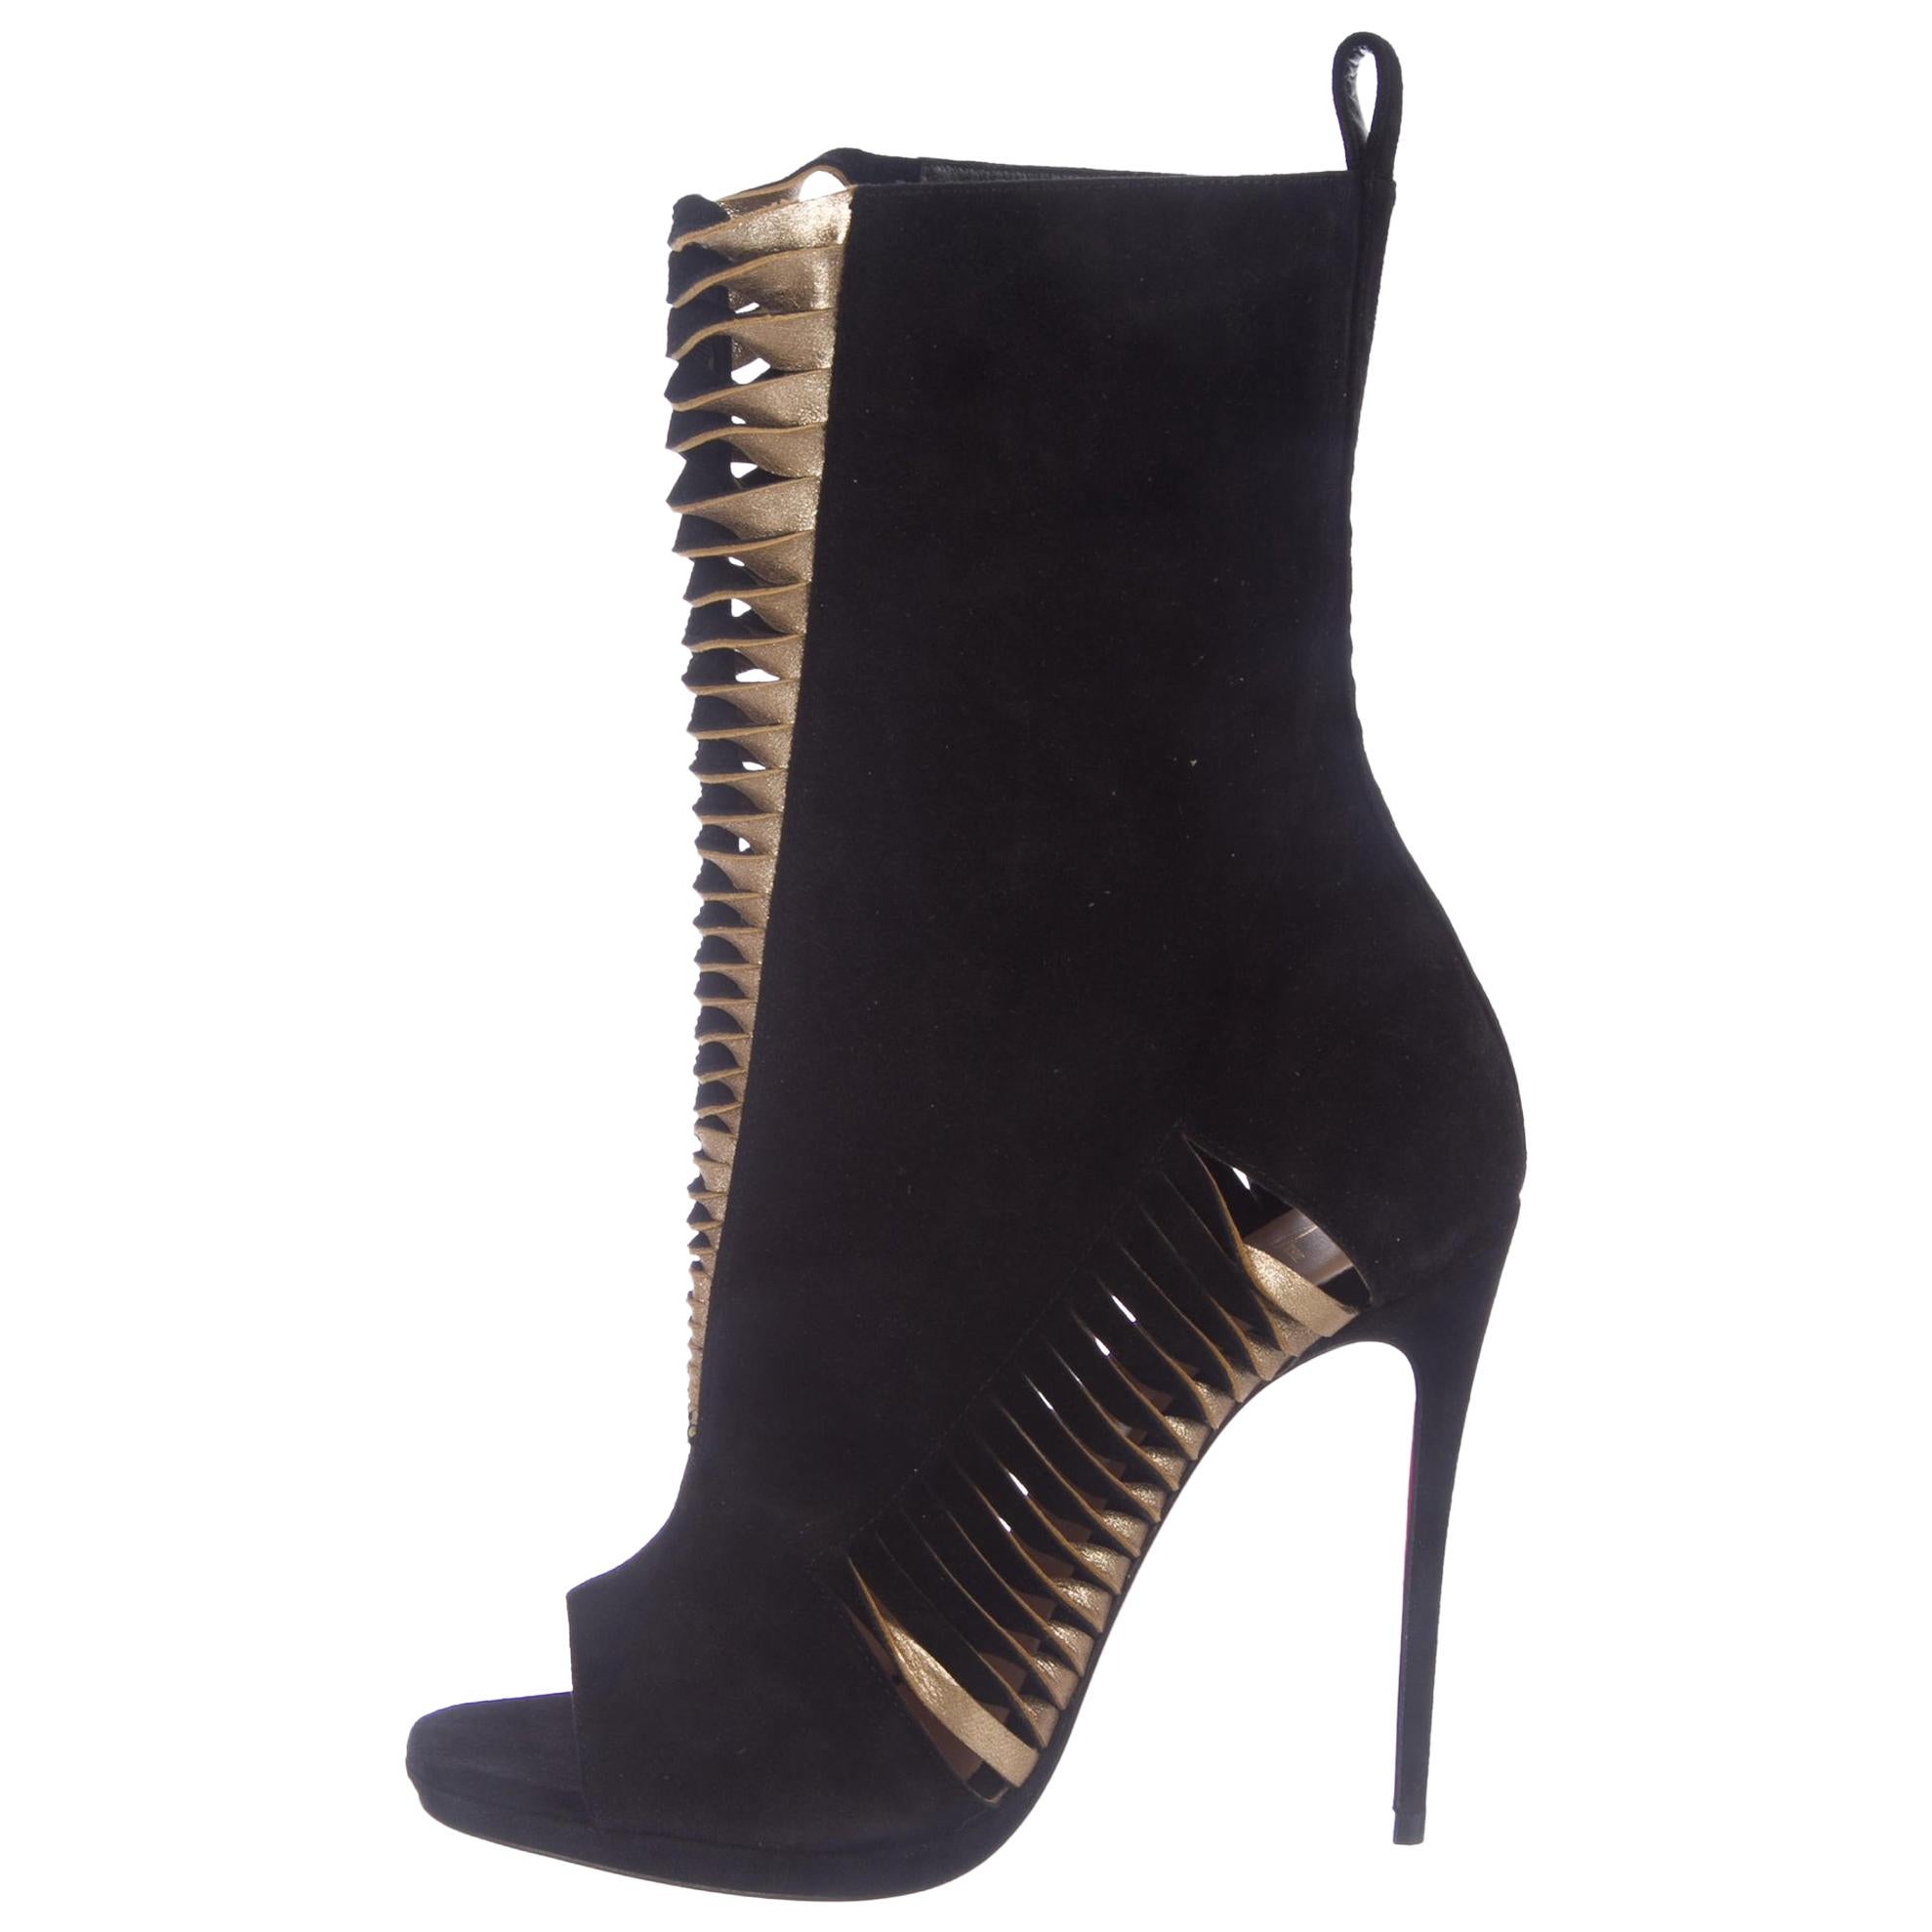 Christian Louboutin NEW Black Suede Gold Leather Ankle Boots Booties in Box